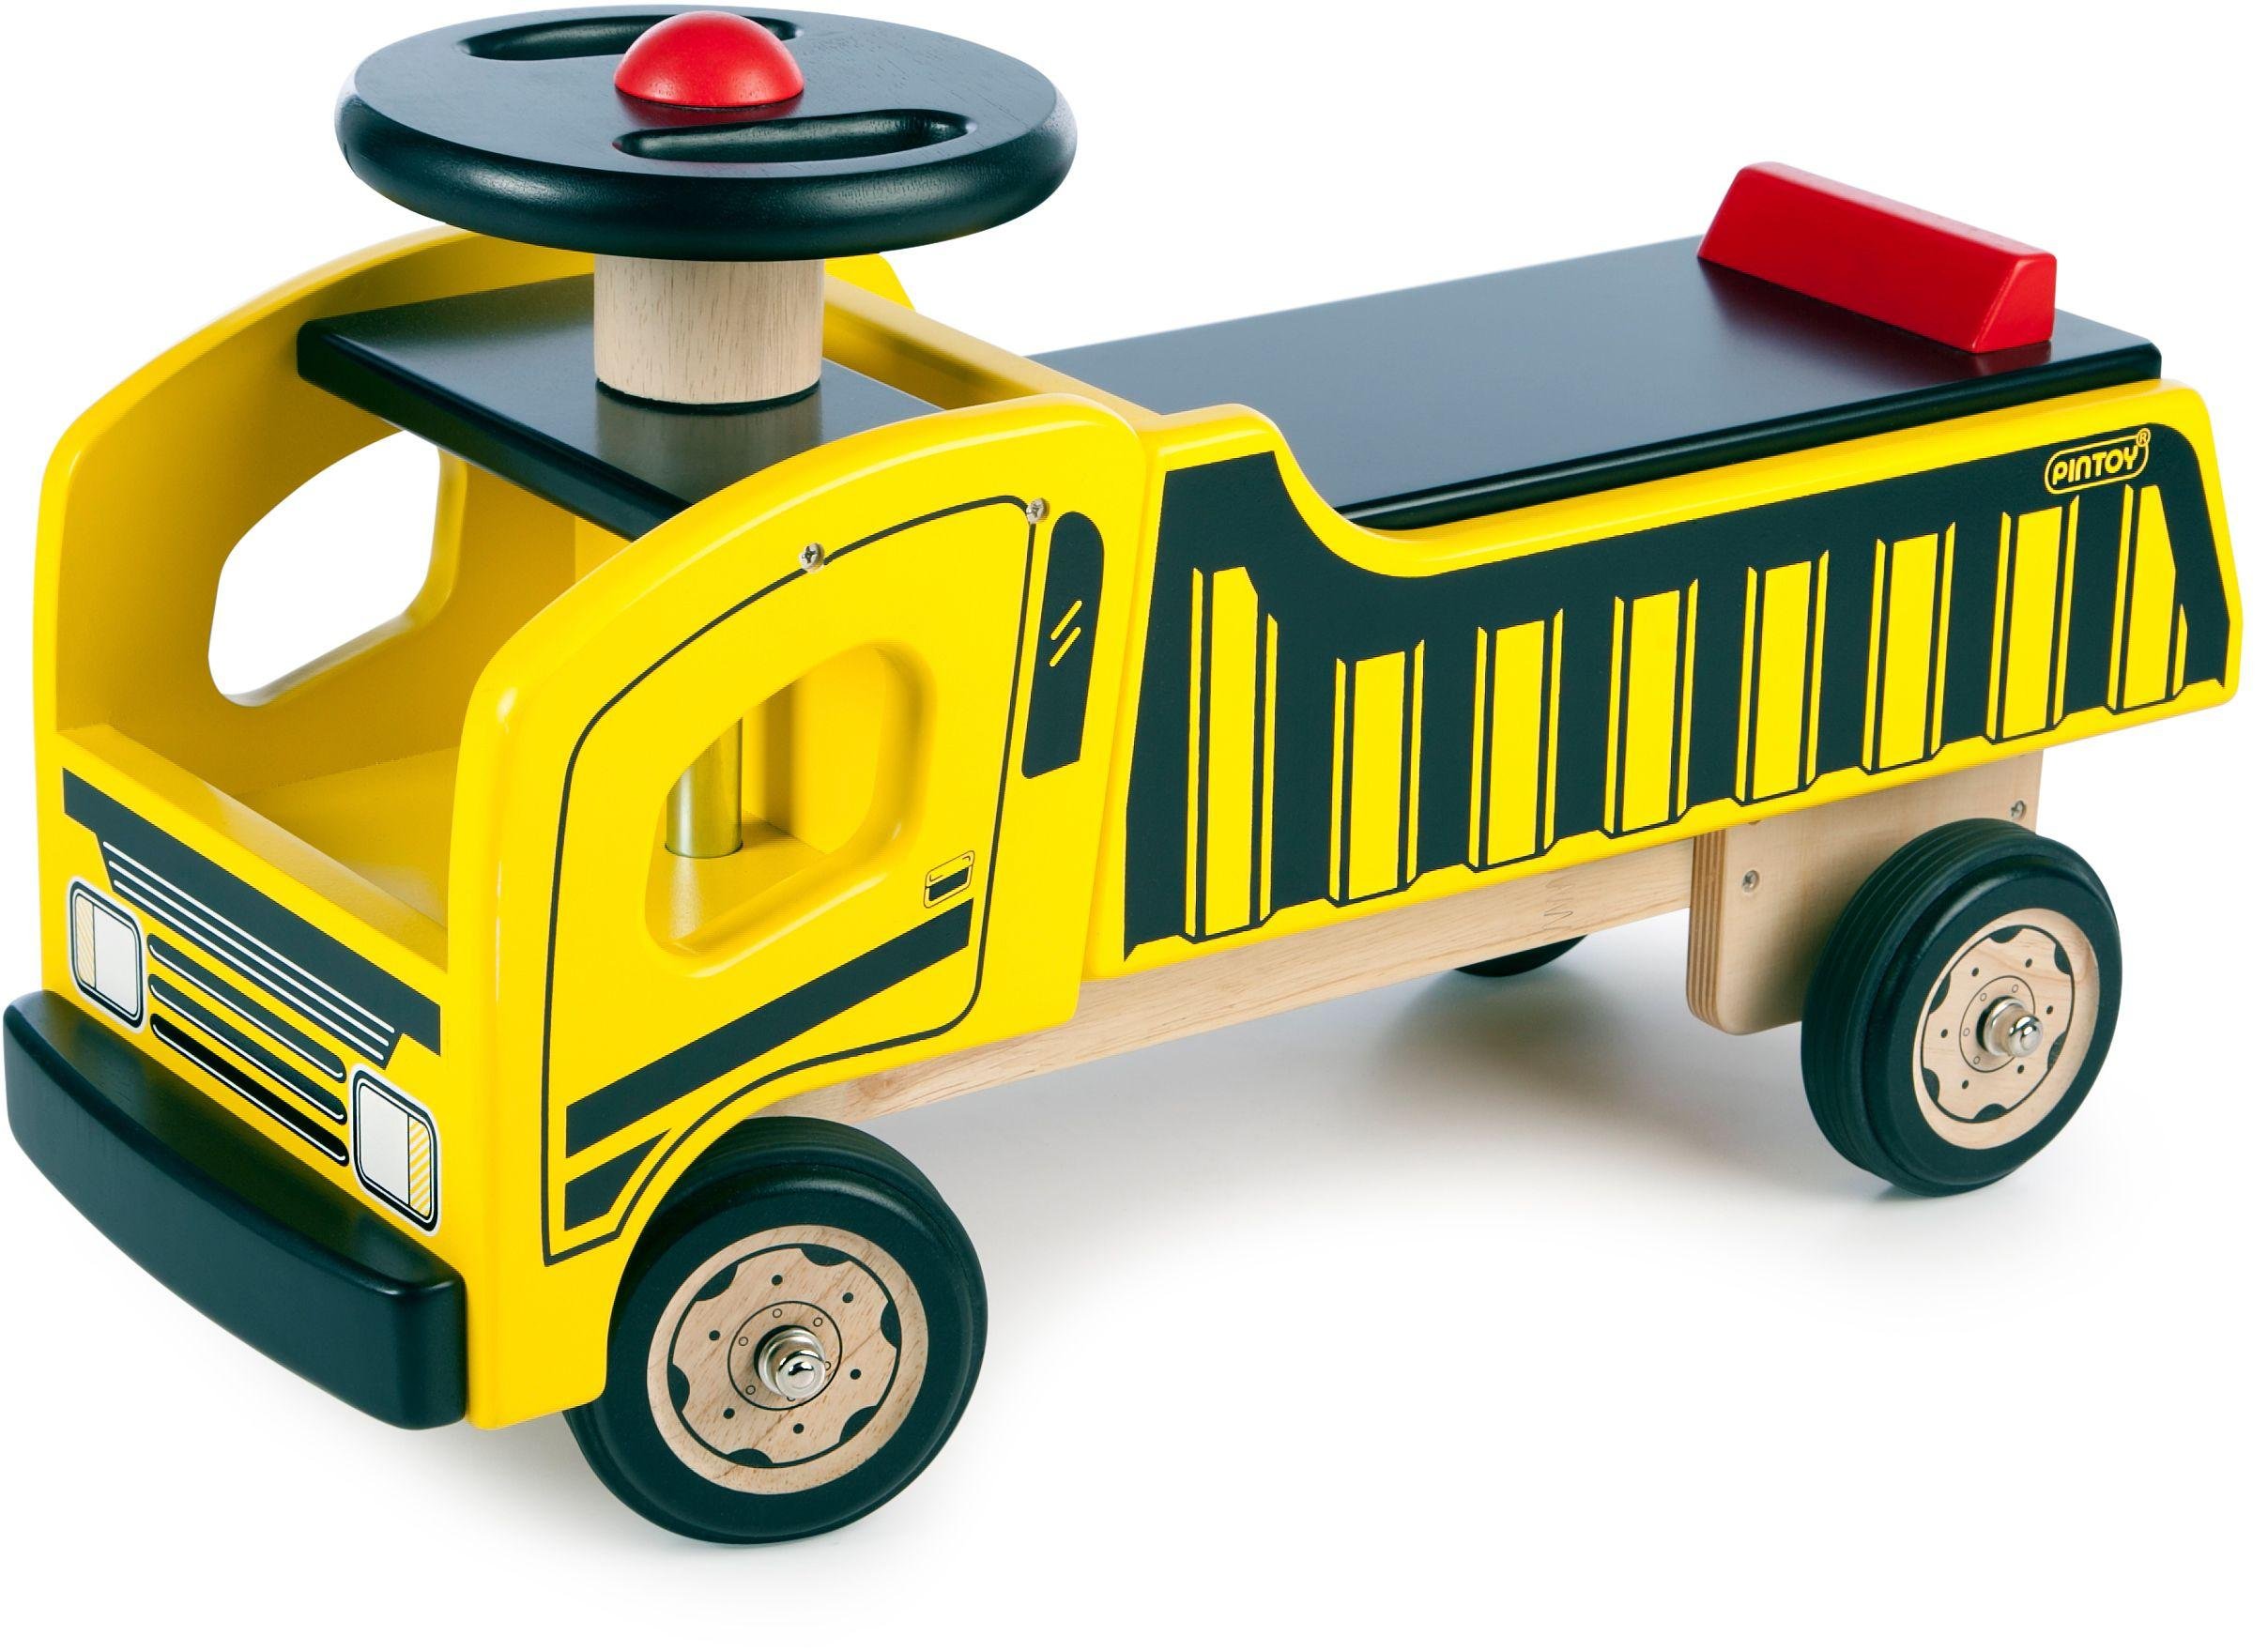 Pintoy Ride On Construction Truck